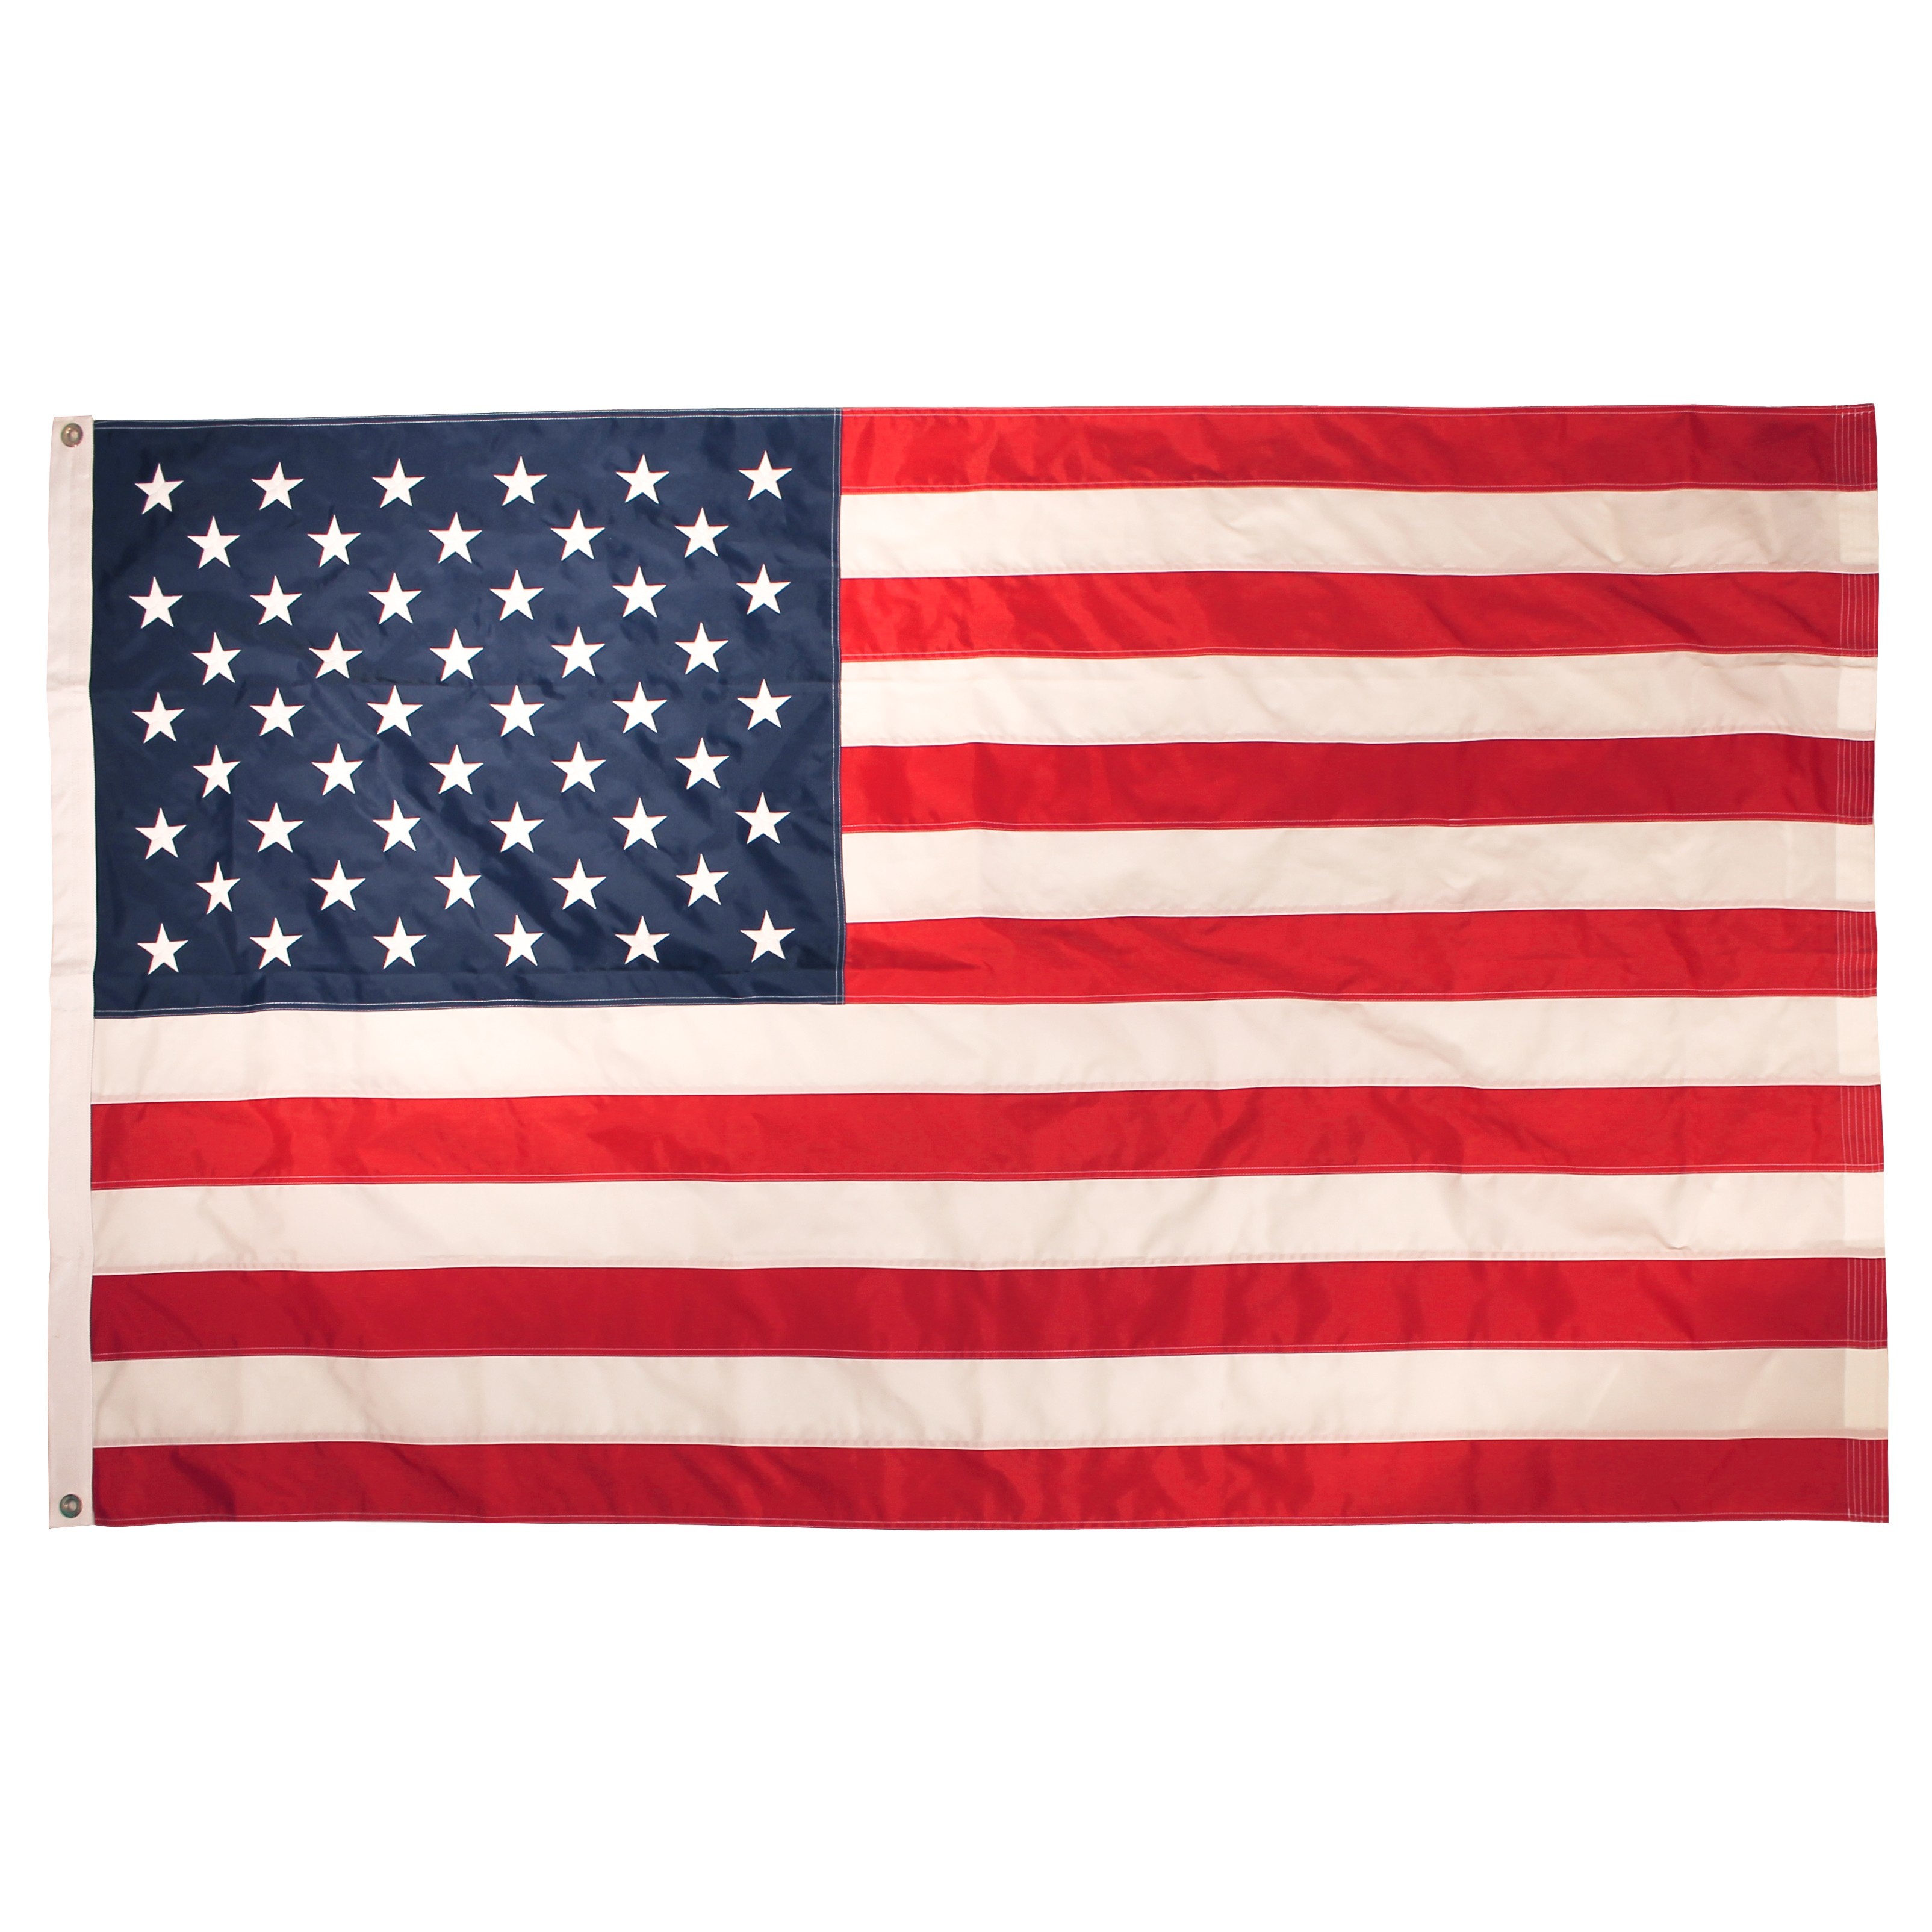 United States T Table Flags